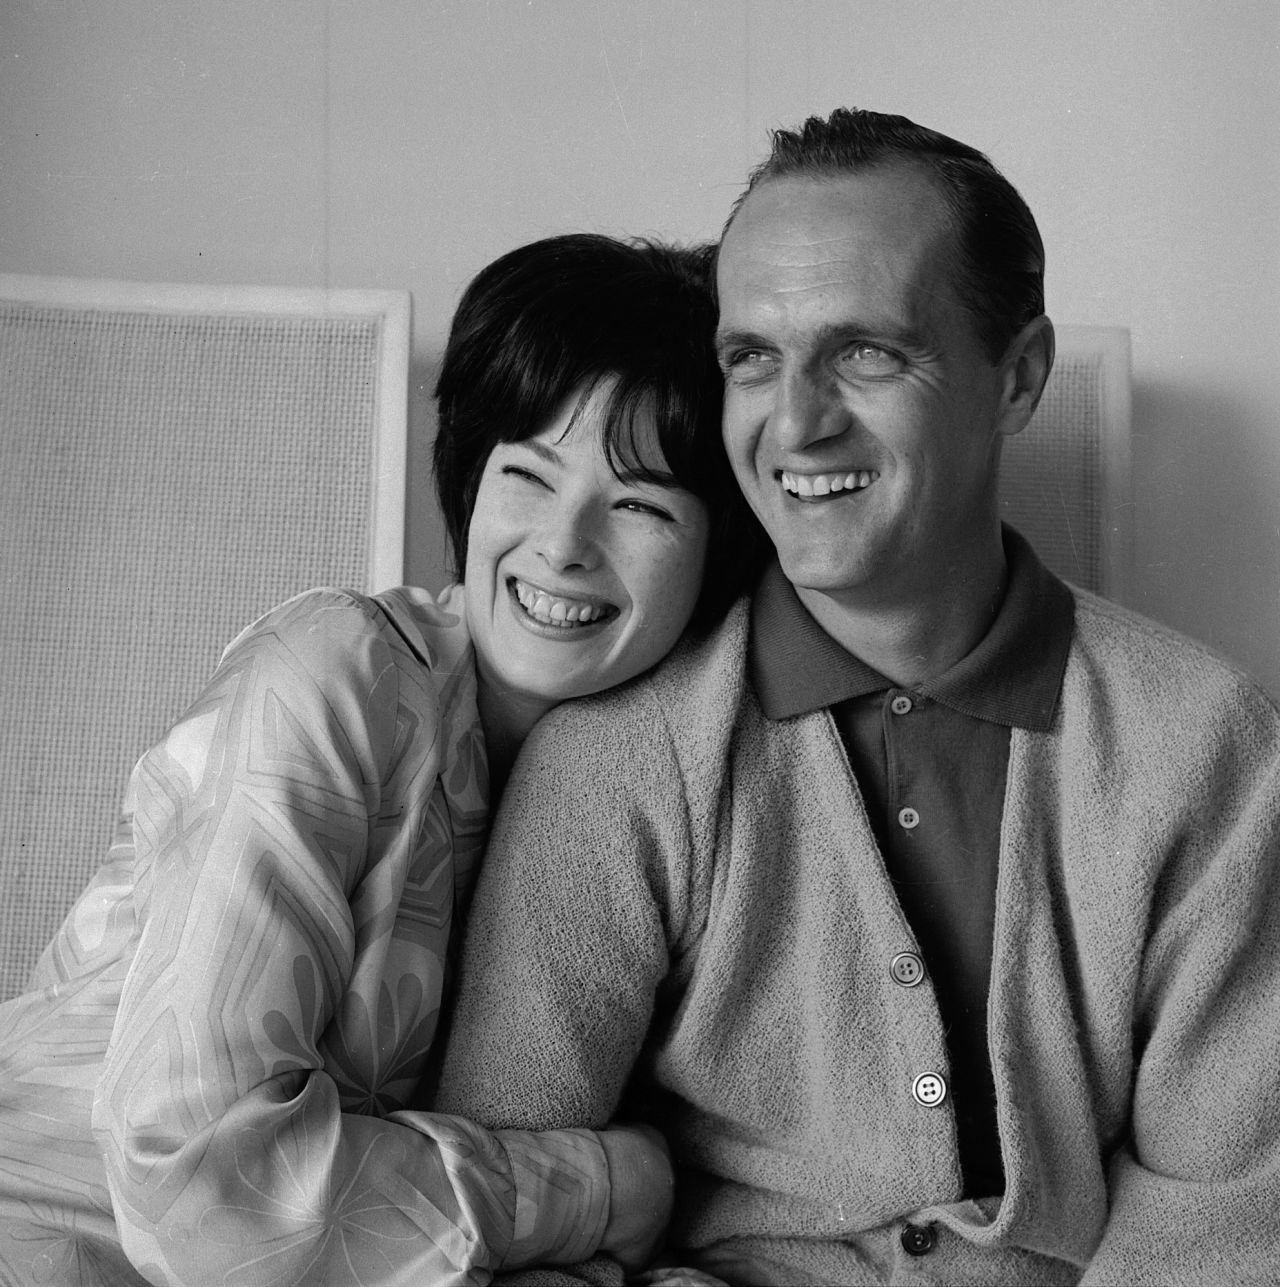 Newhart and his wife Ginny laugh together at their home in Westwood, Los Angeles, California, in 1964.